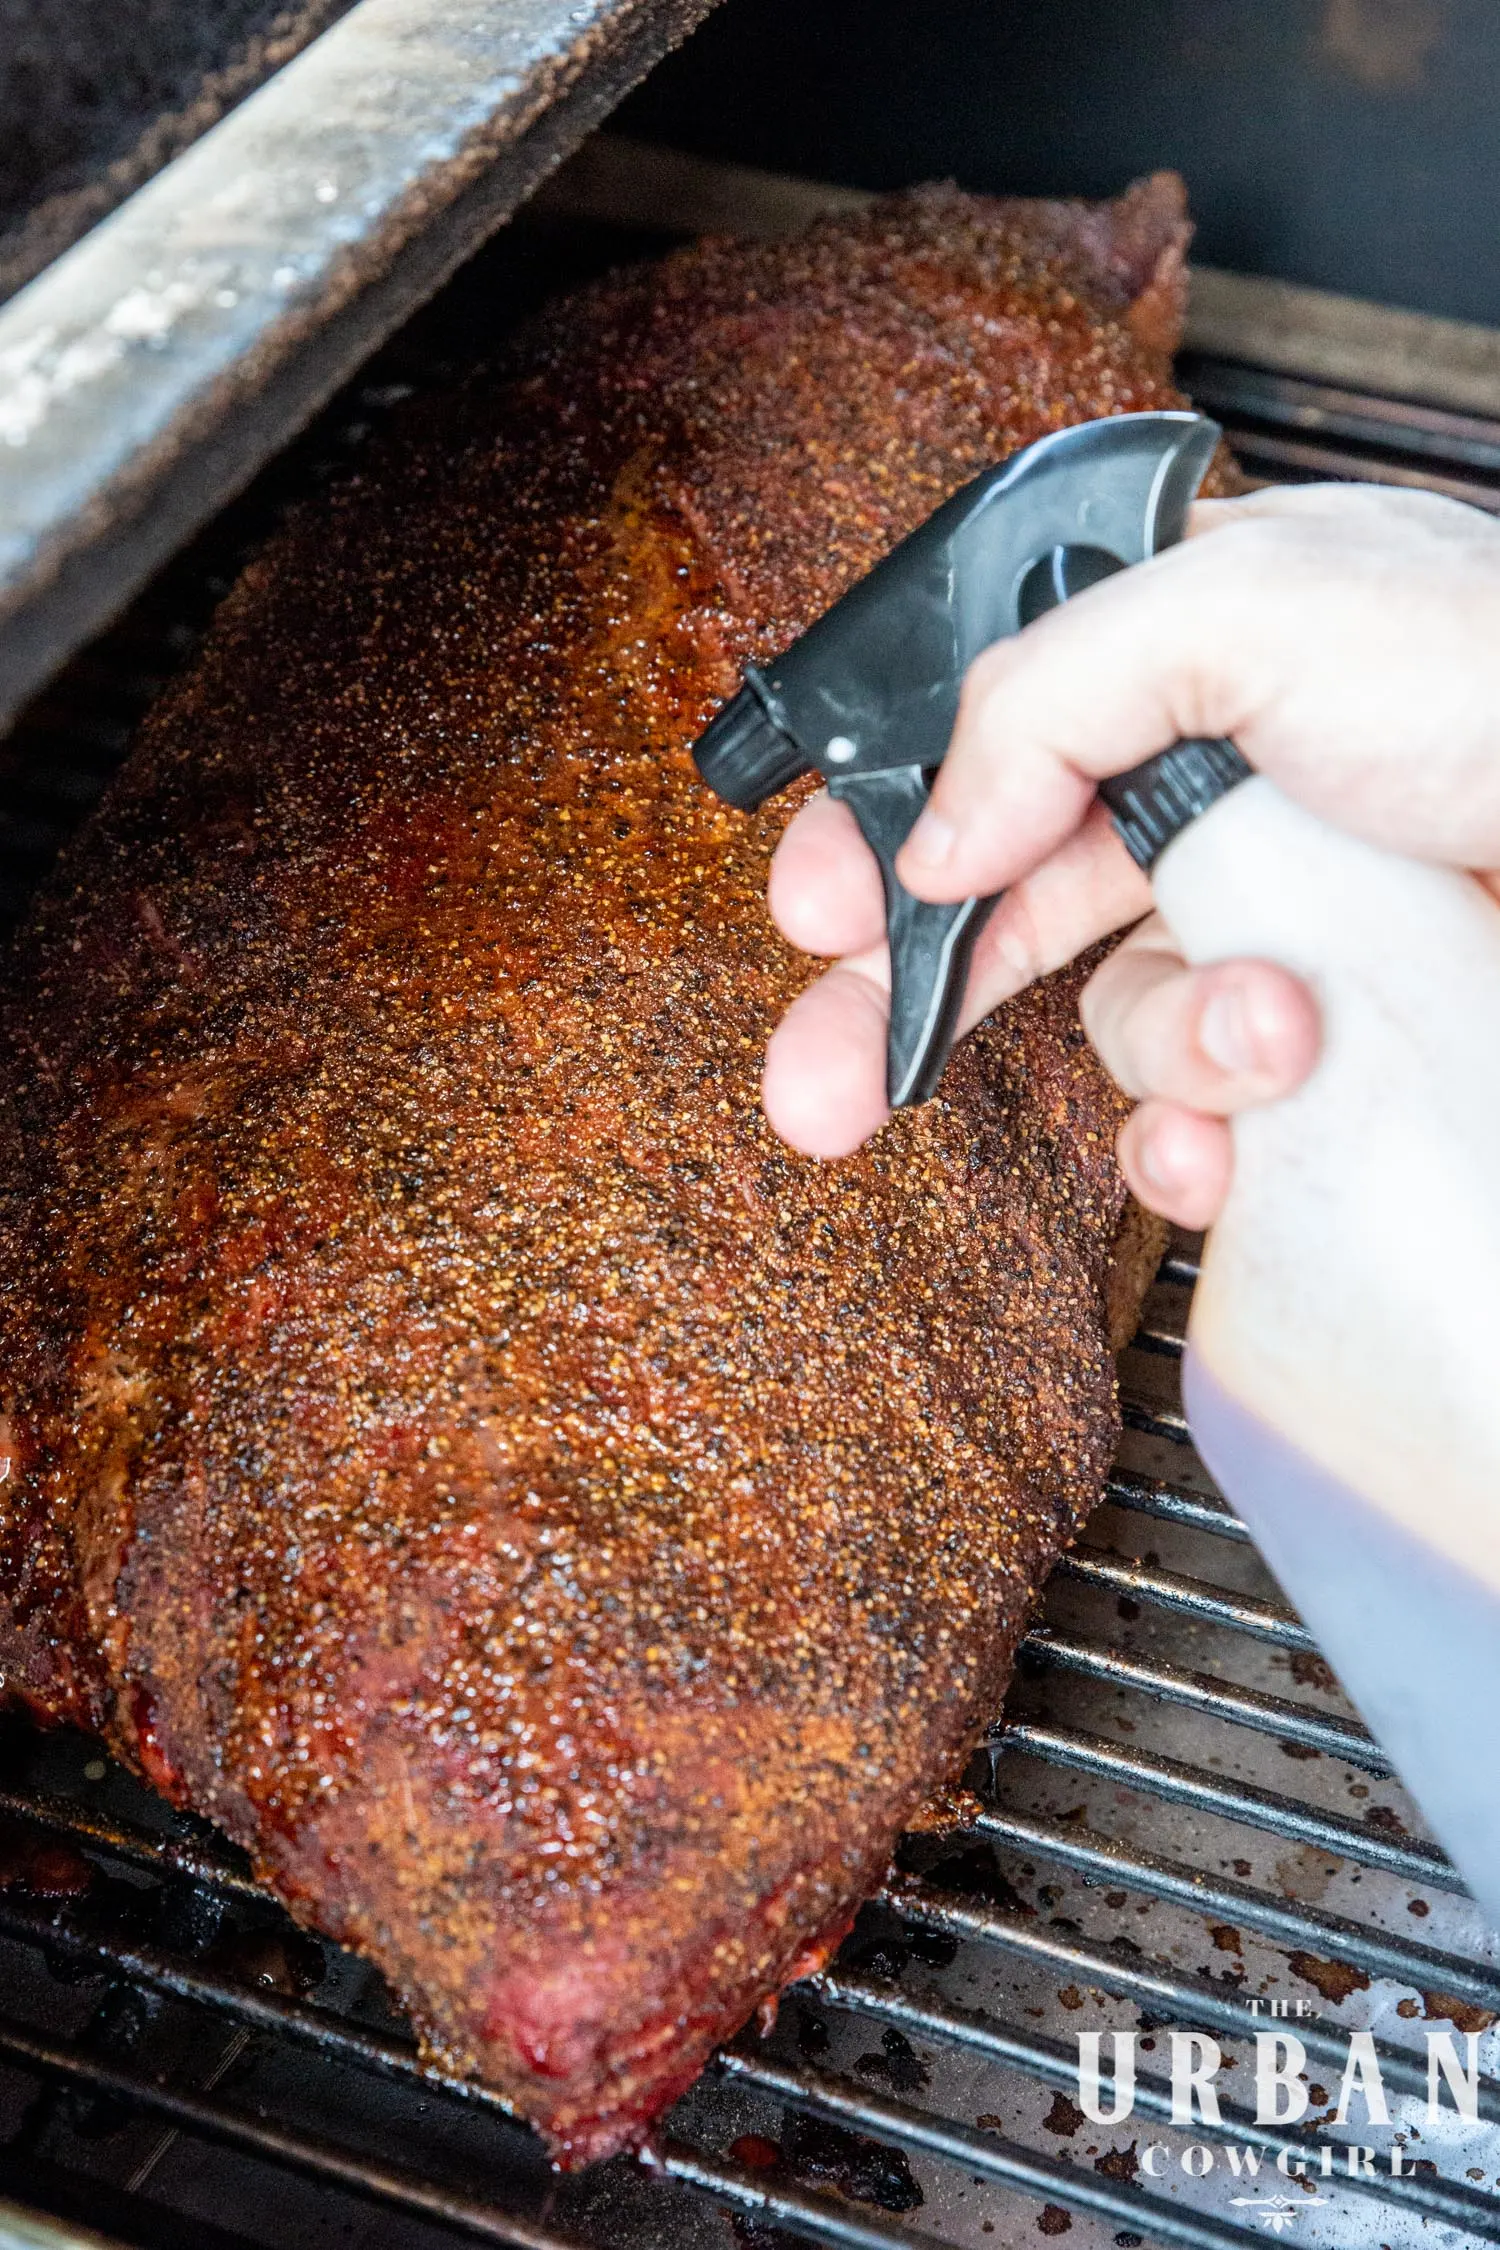 a brisket on the smoker being sprayed with a squirt bottle filled with red liquid.